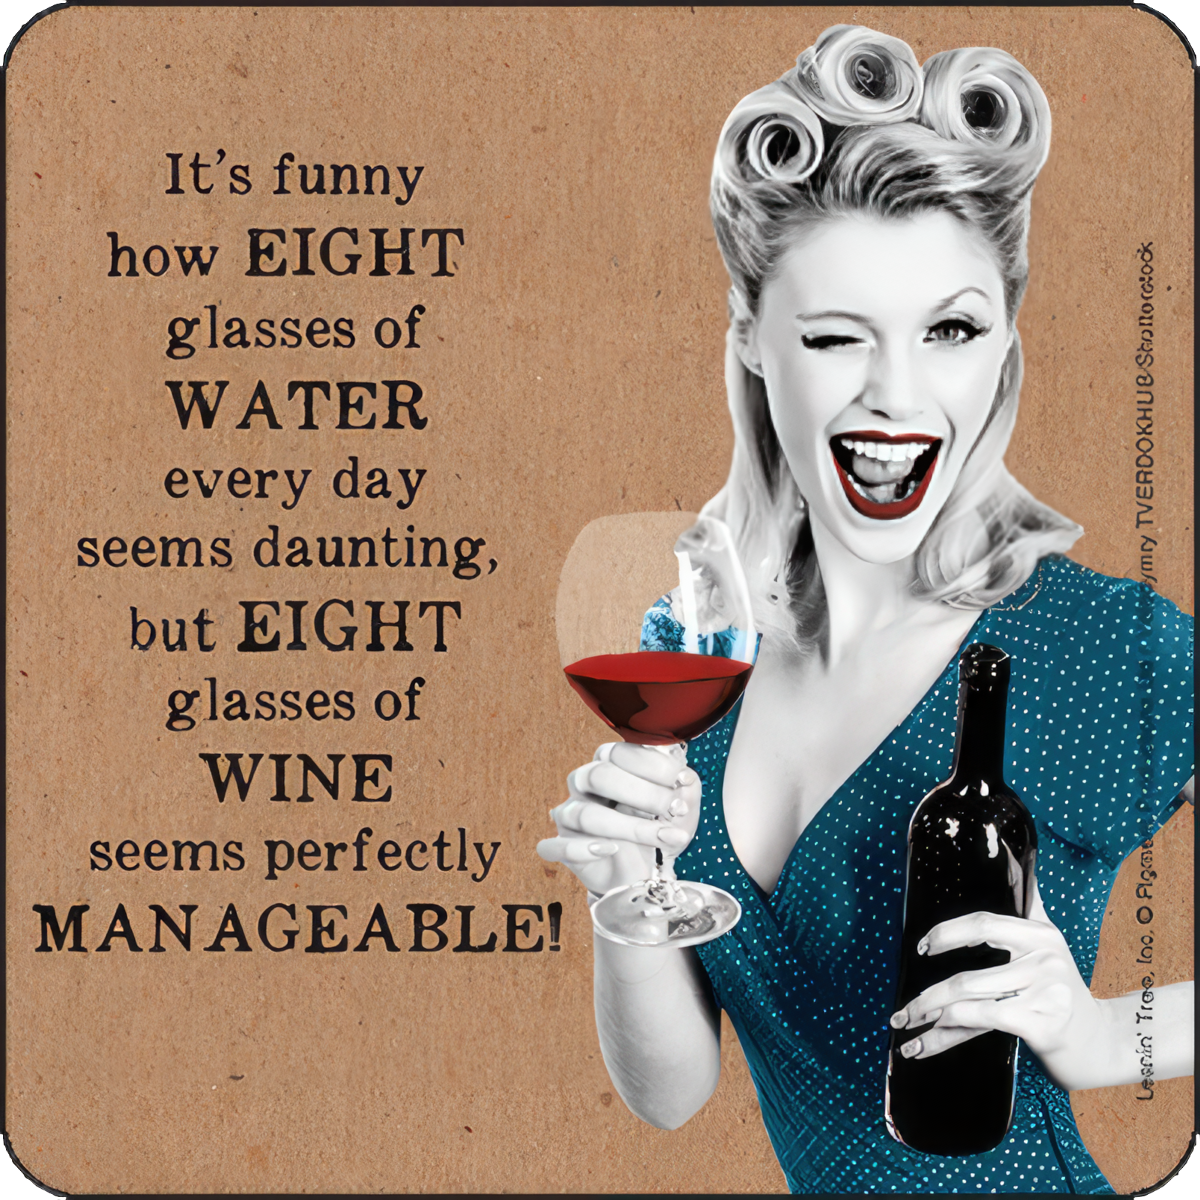 EIGHT glasses of WINE seems perfectly MANAGEABLE!